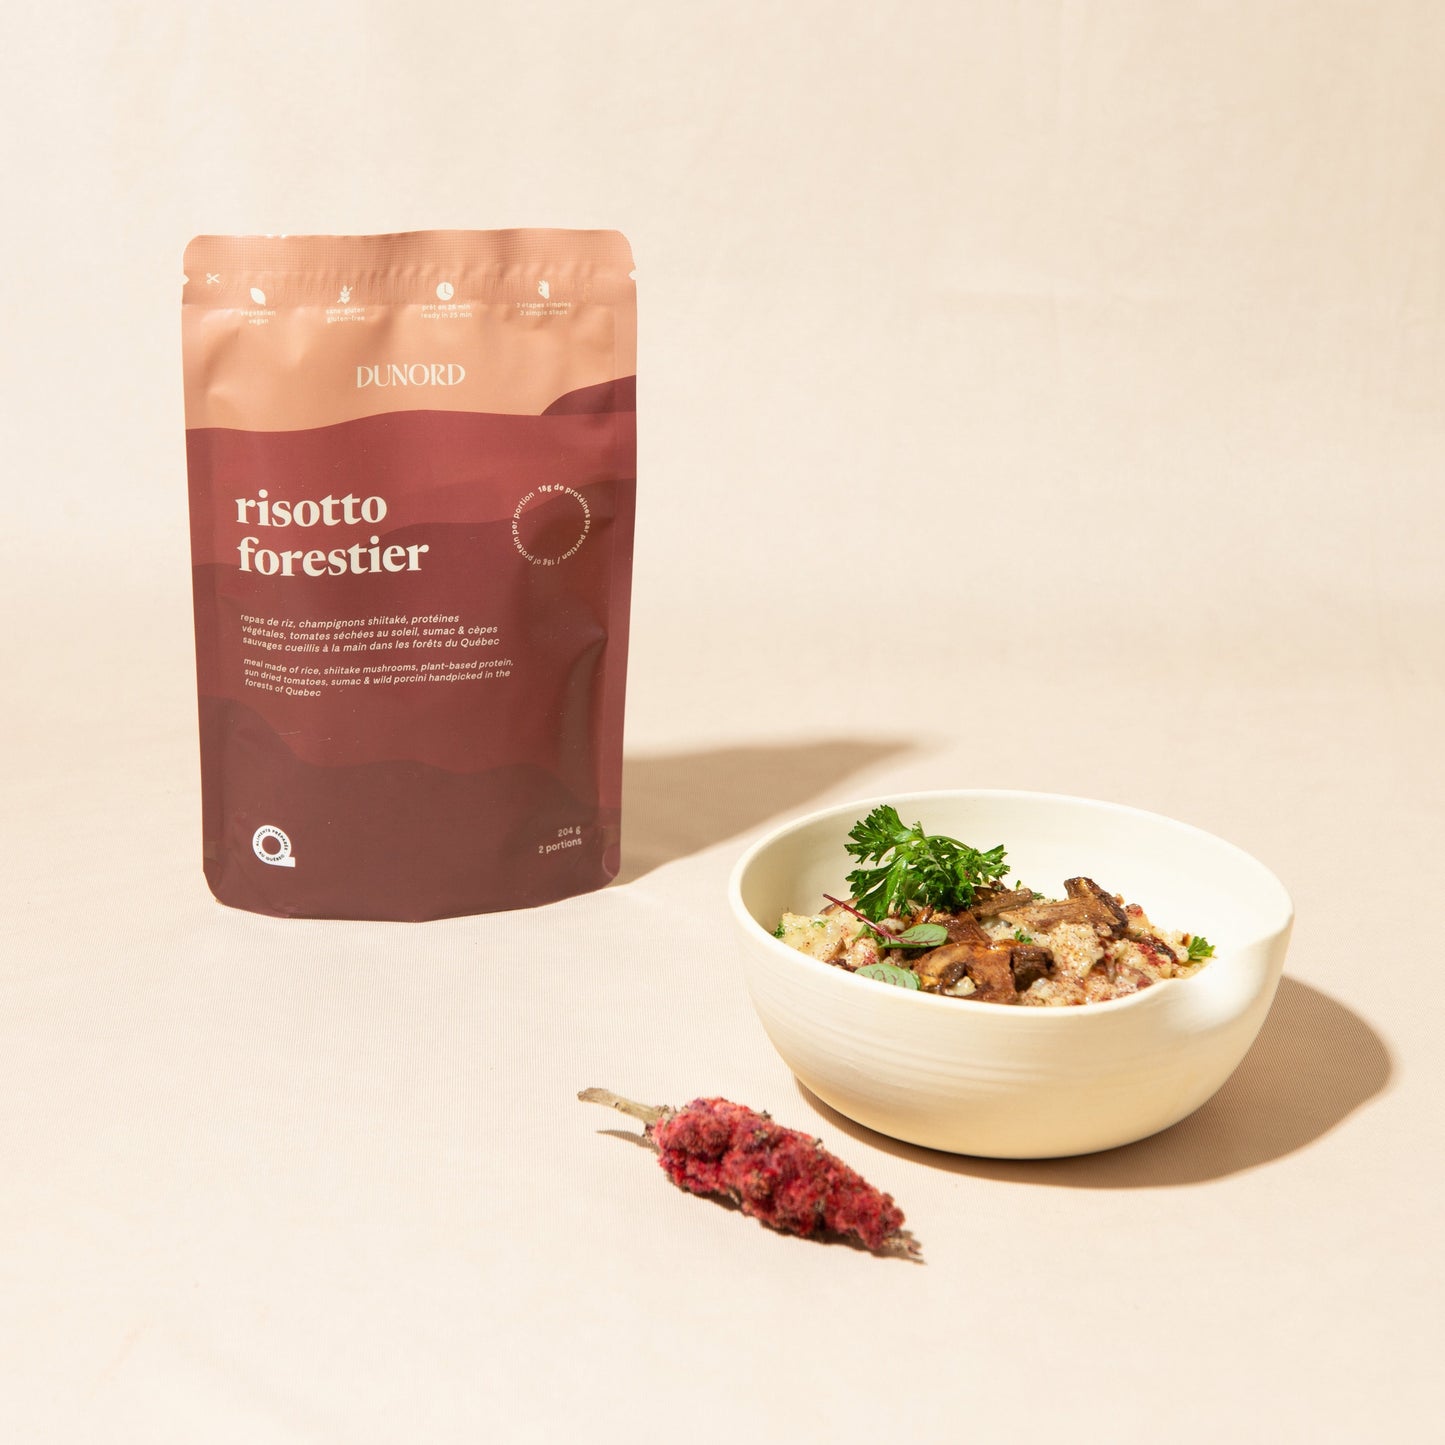 Risotto forestier (2 portions)